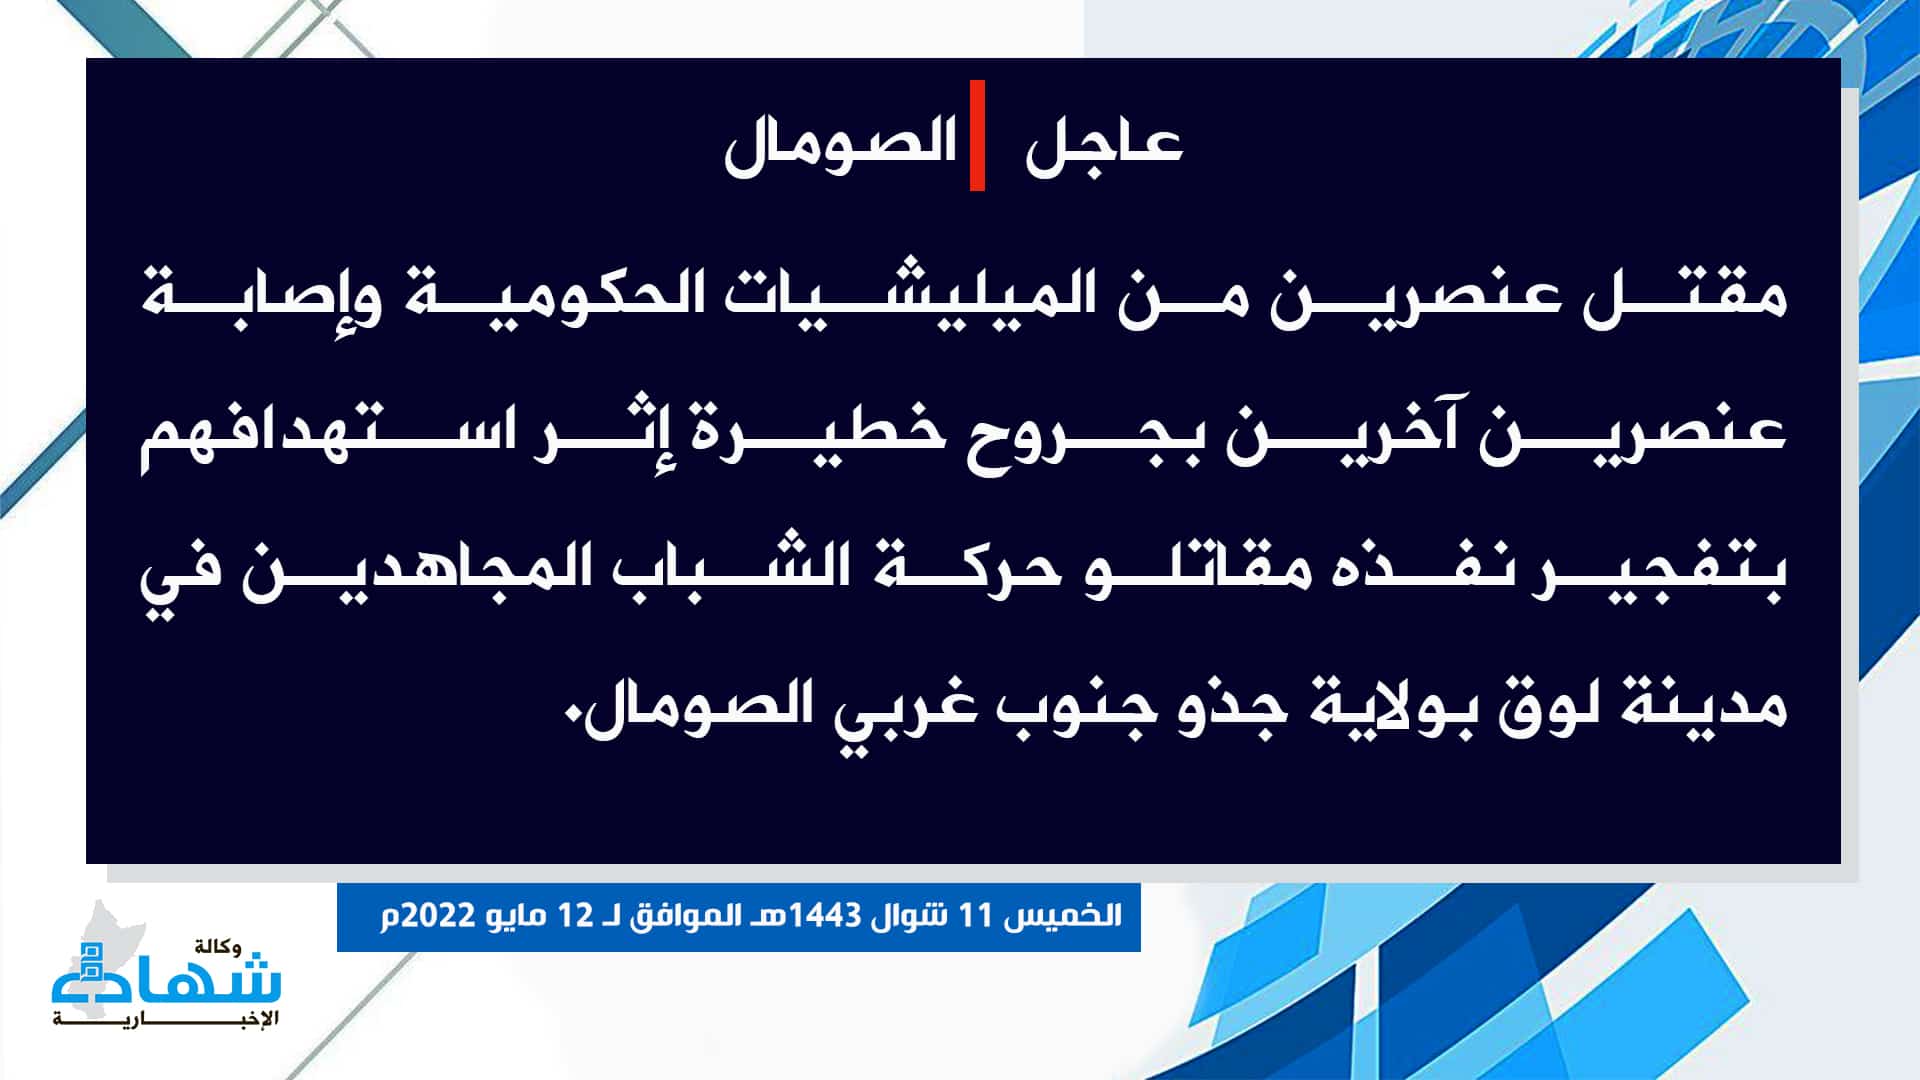 (Claim) al-Shabaab: Two Somalian Army Elements Were Killed and Two Others Were Injured in an IED Attack in Louq City, Gedo State, Southwestern Somalia - 12 May 2022